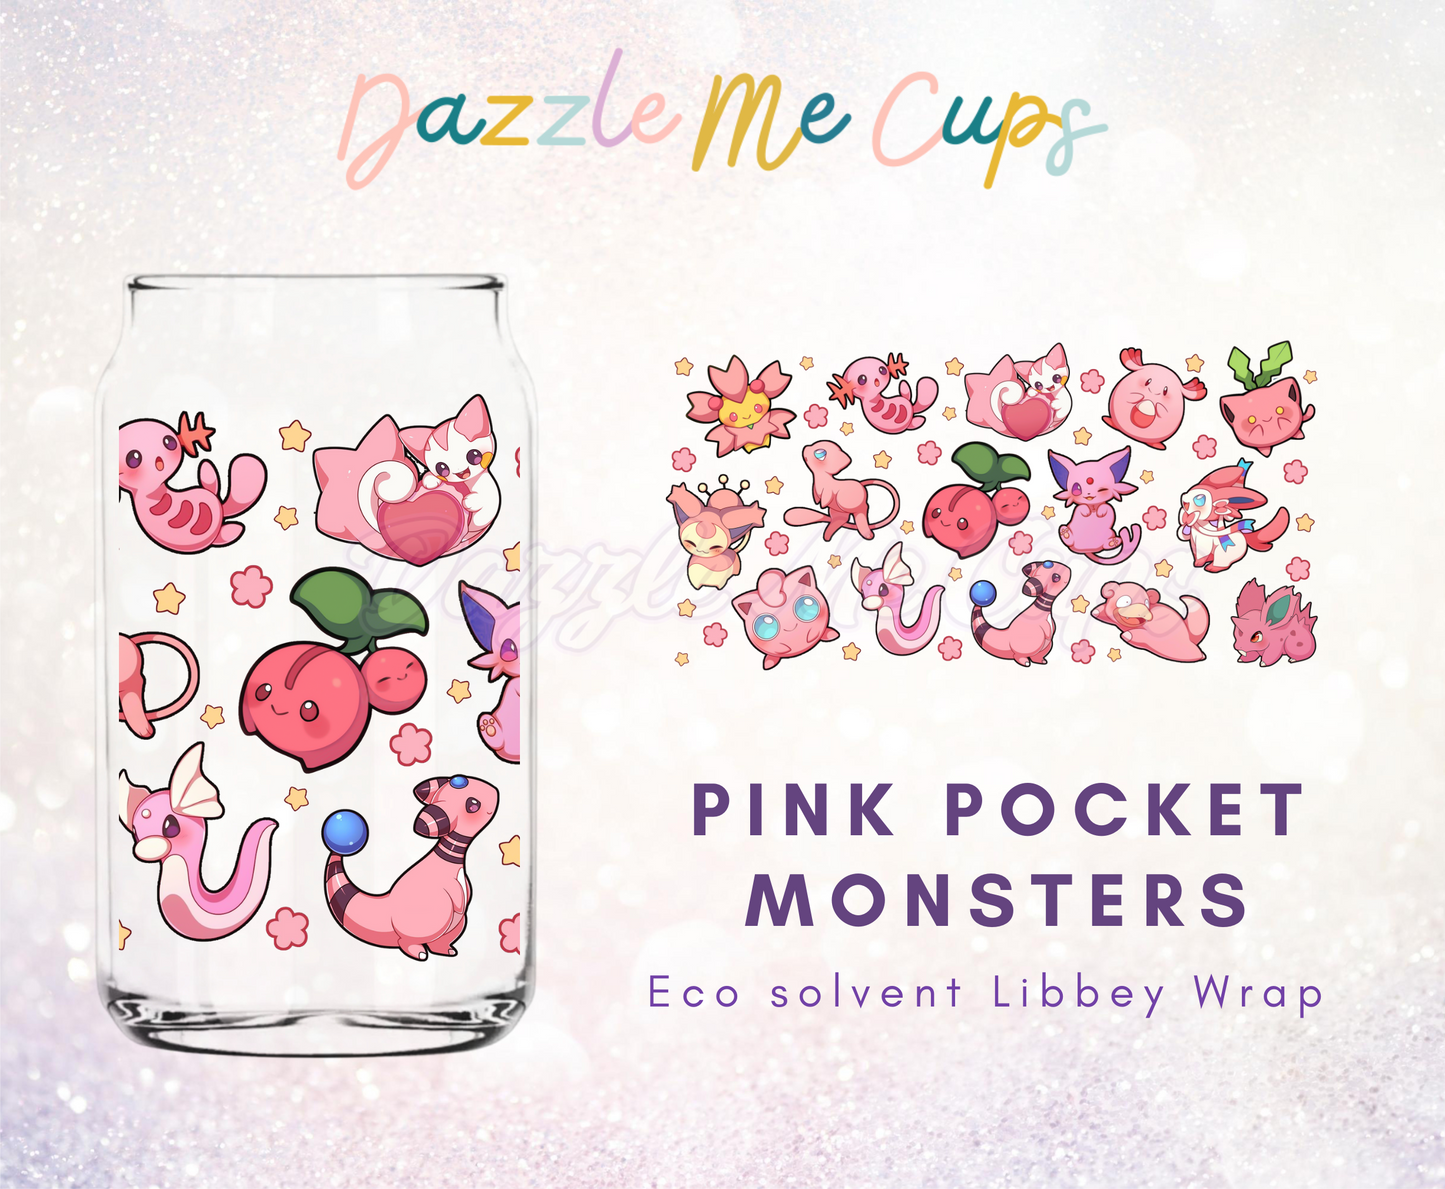 Pink Pocket Monsters Libbey Wrap